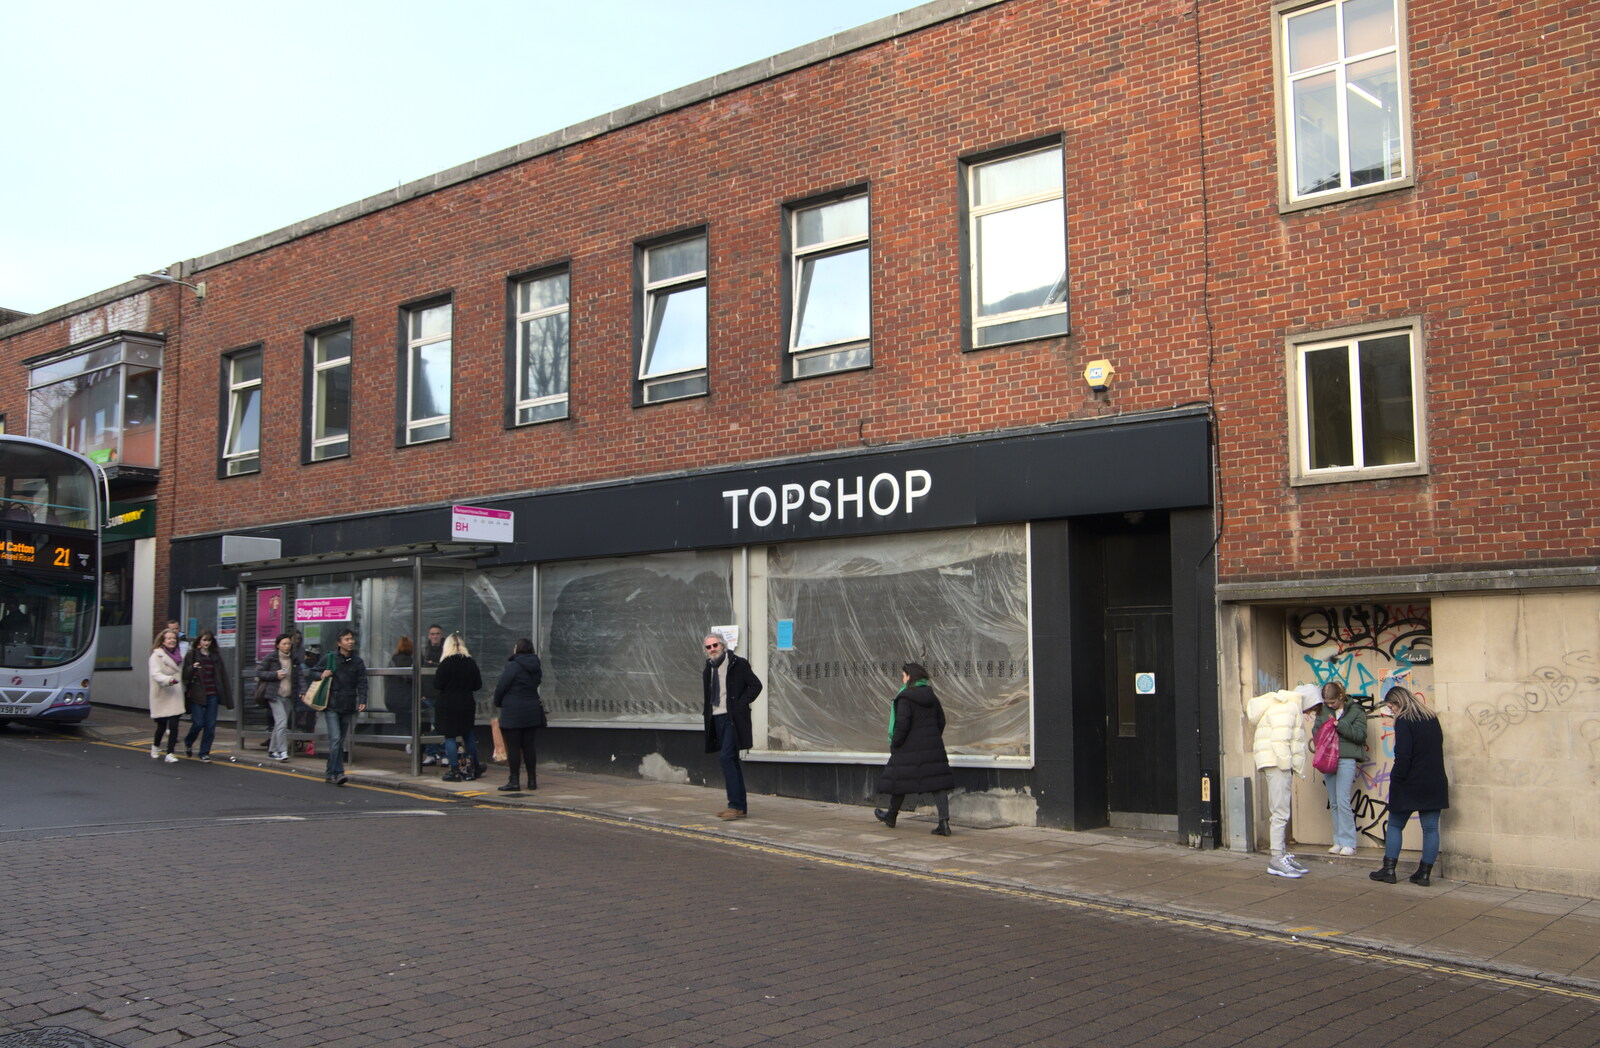 The back entrance of the defunct Topshop from Christmas Day and Other Stuff, Diss, Brome and Norwich - 25th December 2022